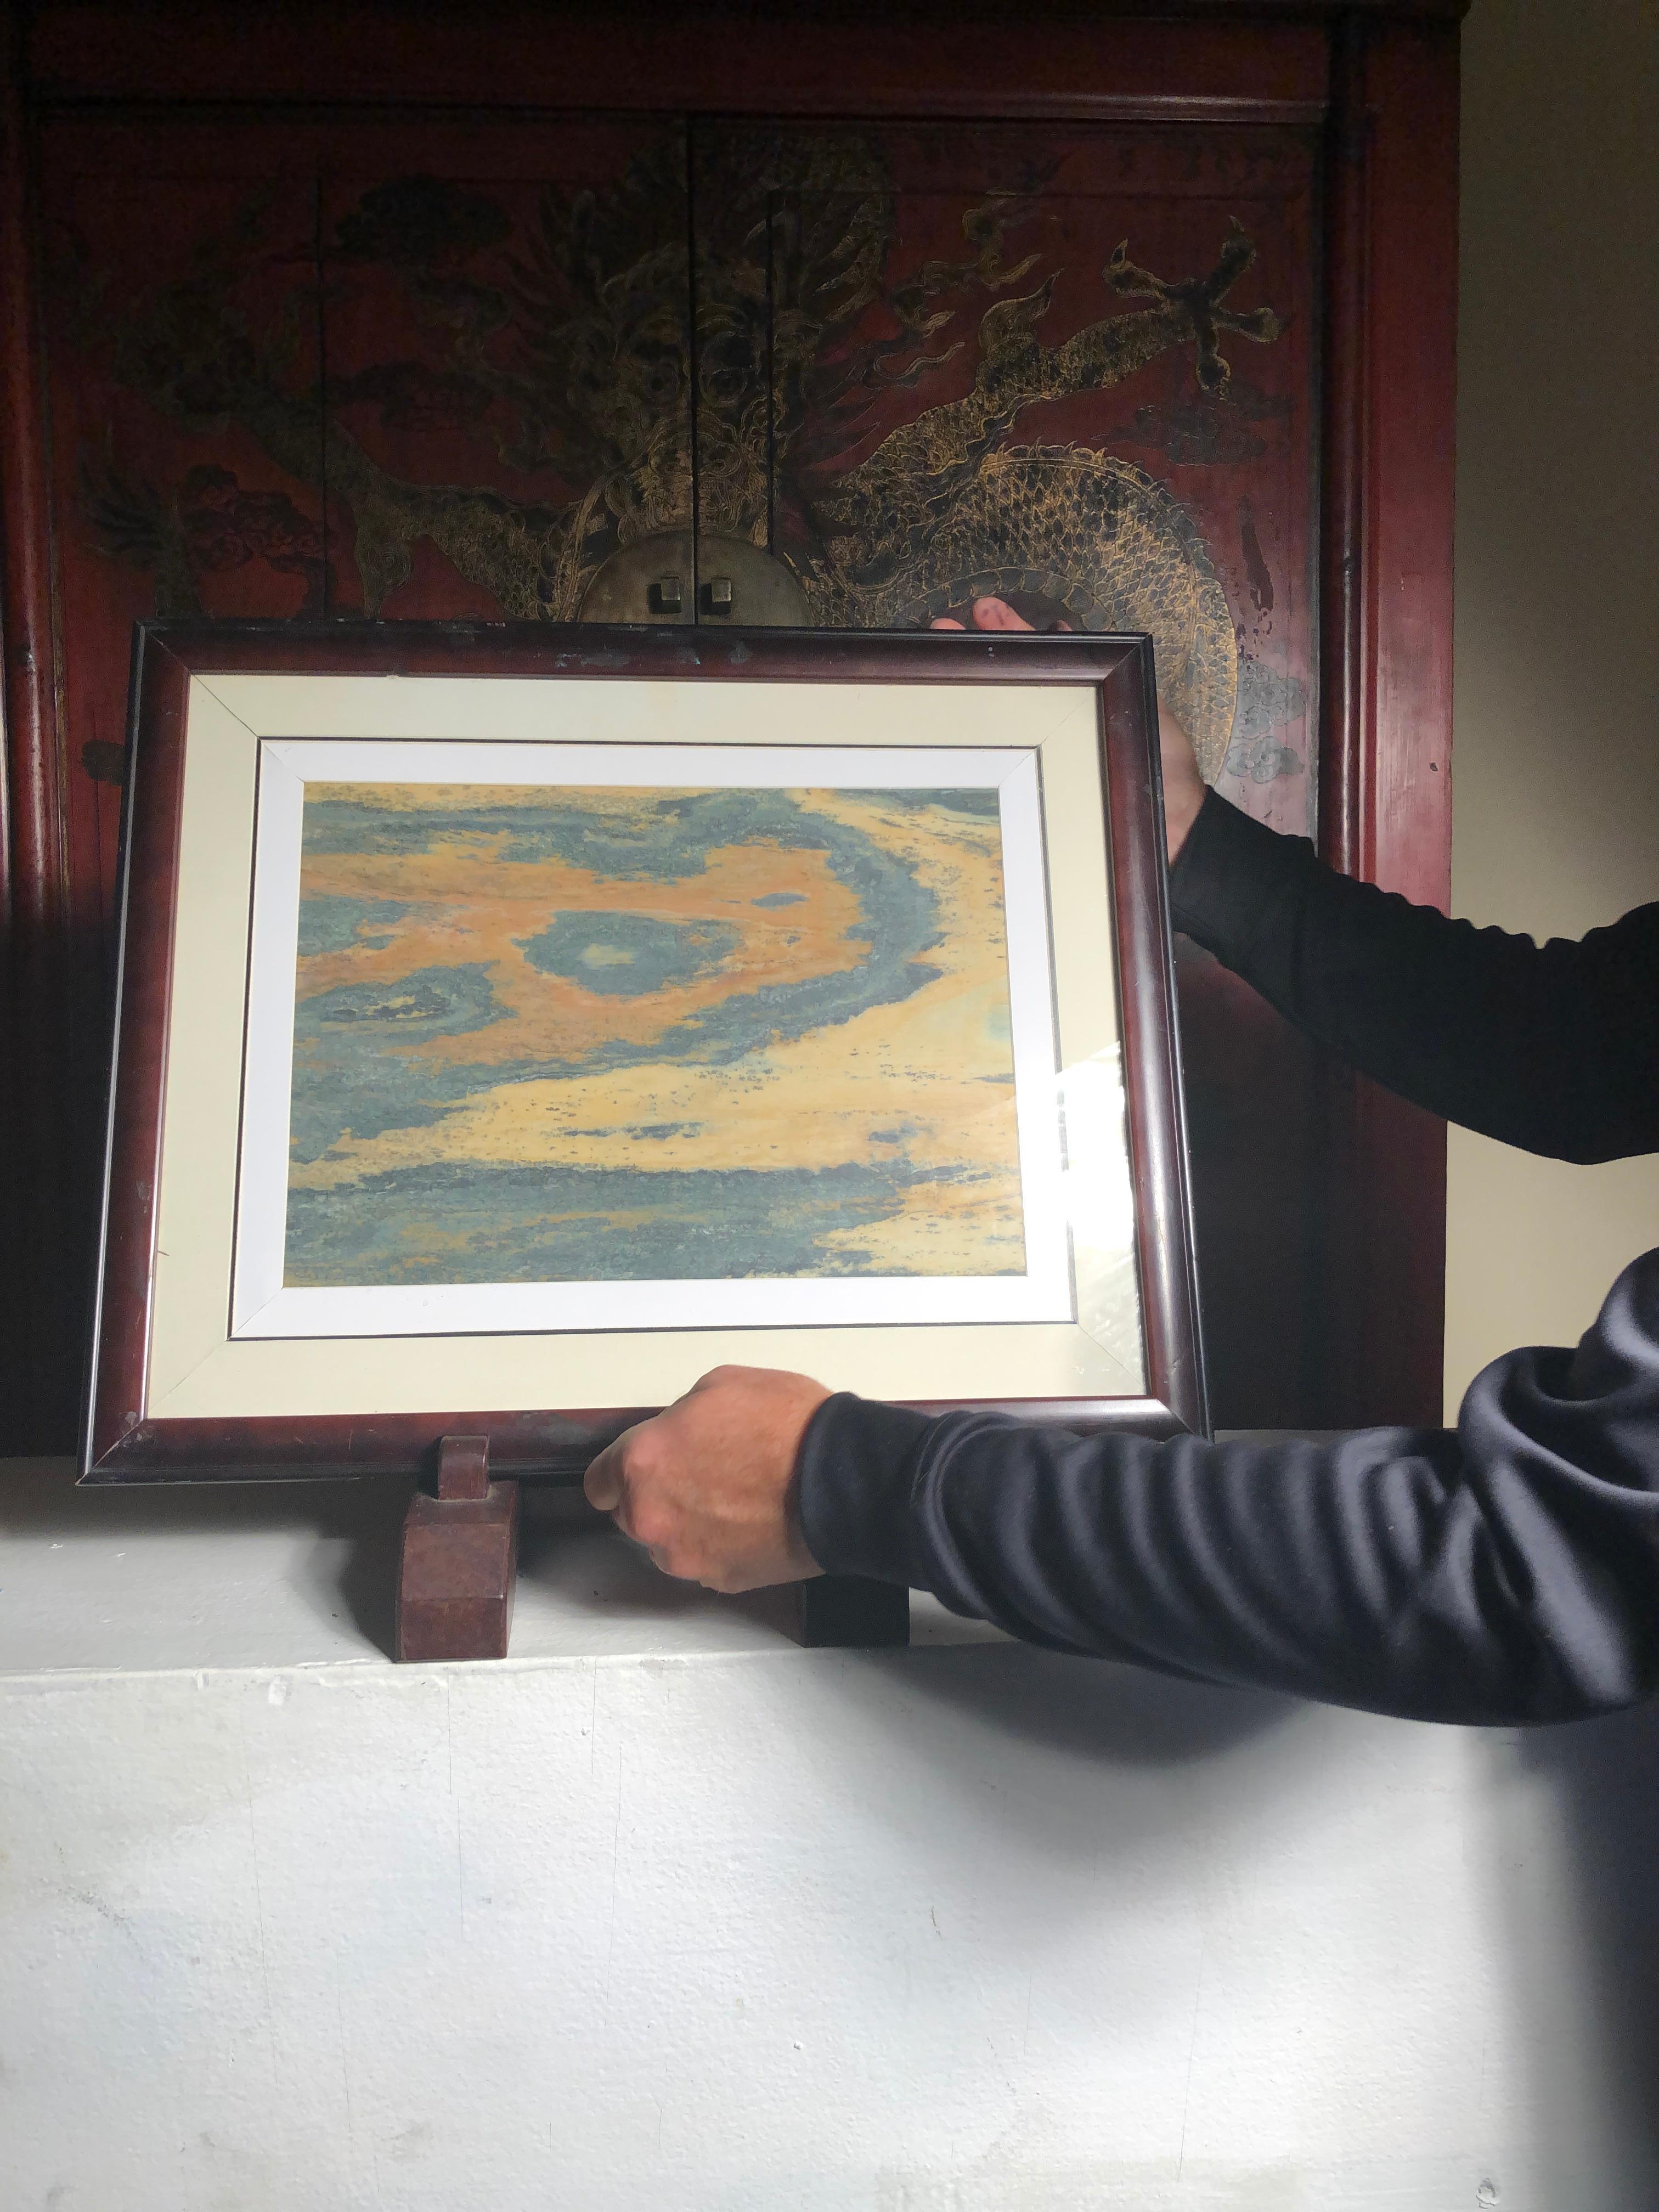 Extraordinary natural work, one of a kind. Custom framed

This Chinese extraordinary round natural stone painting of a possible brilliant swirl or scene could remind us of a unique experience and view in our lives. The powerful and colorful